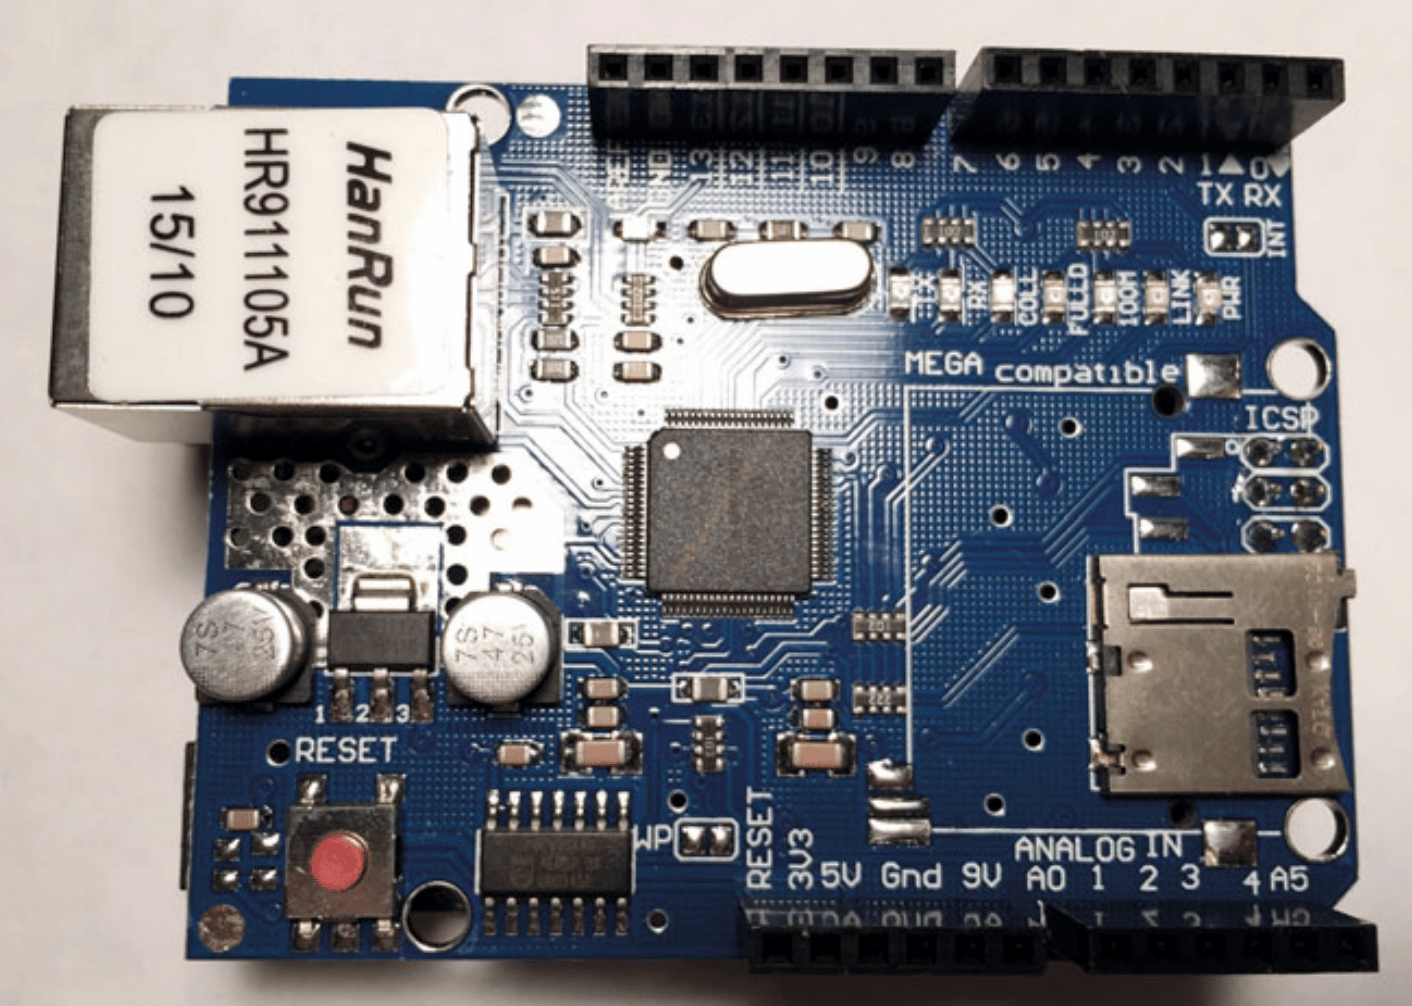 Figure 2: Ethernet Shield attached to Arduino Uno